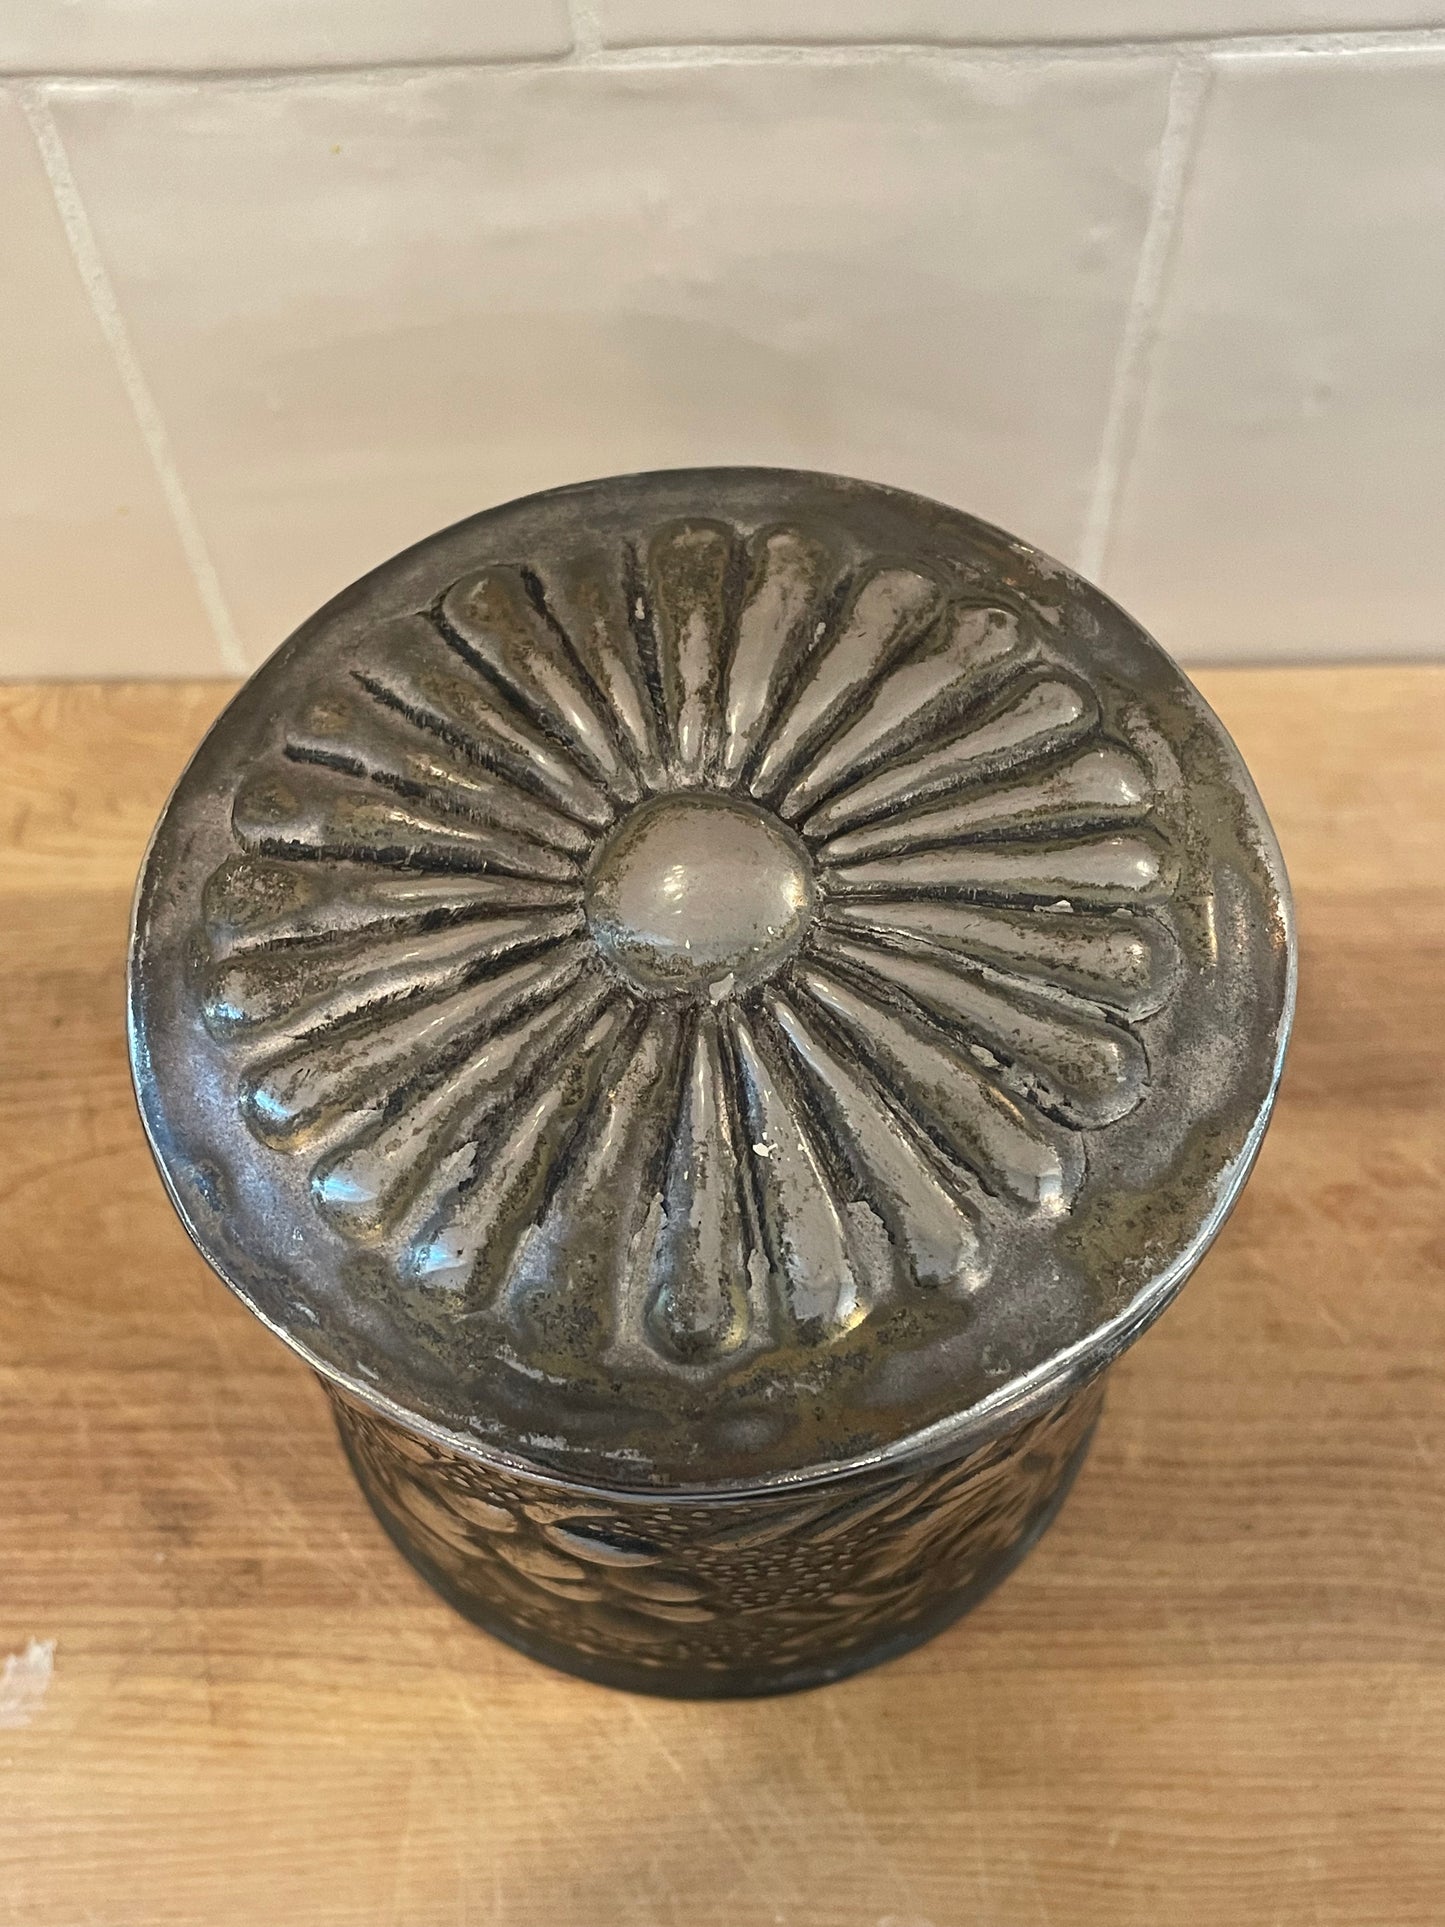 Decorative Tin with Lid